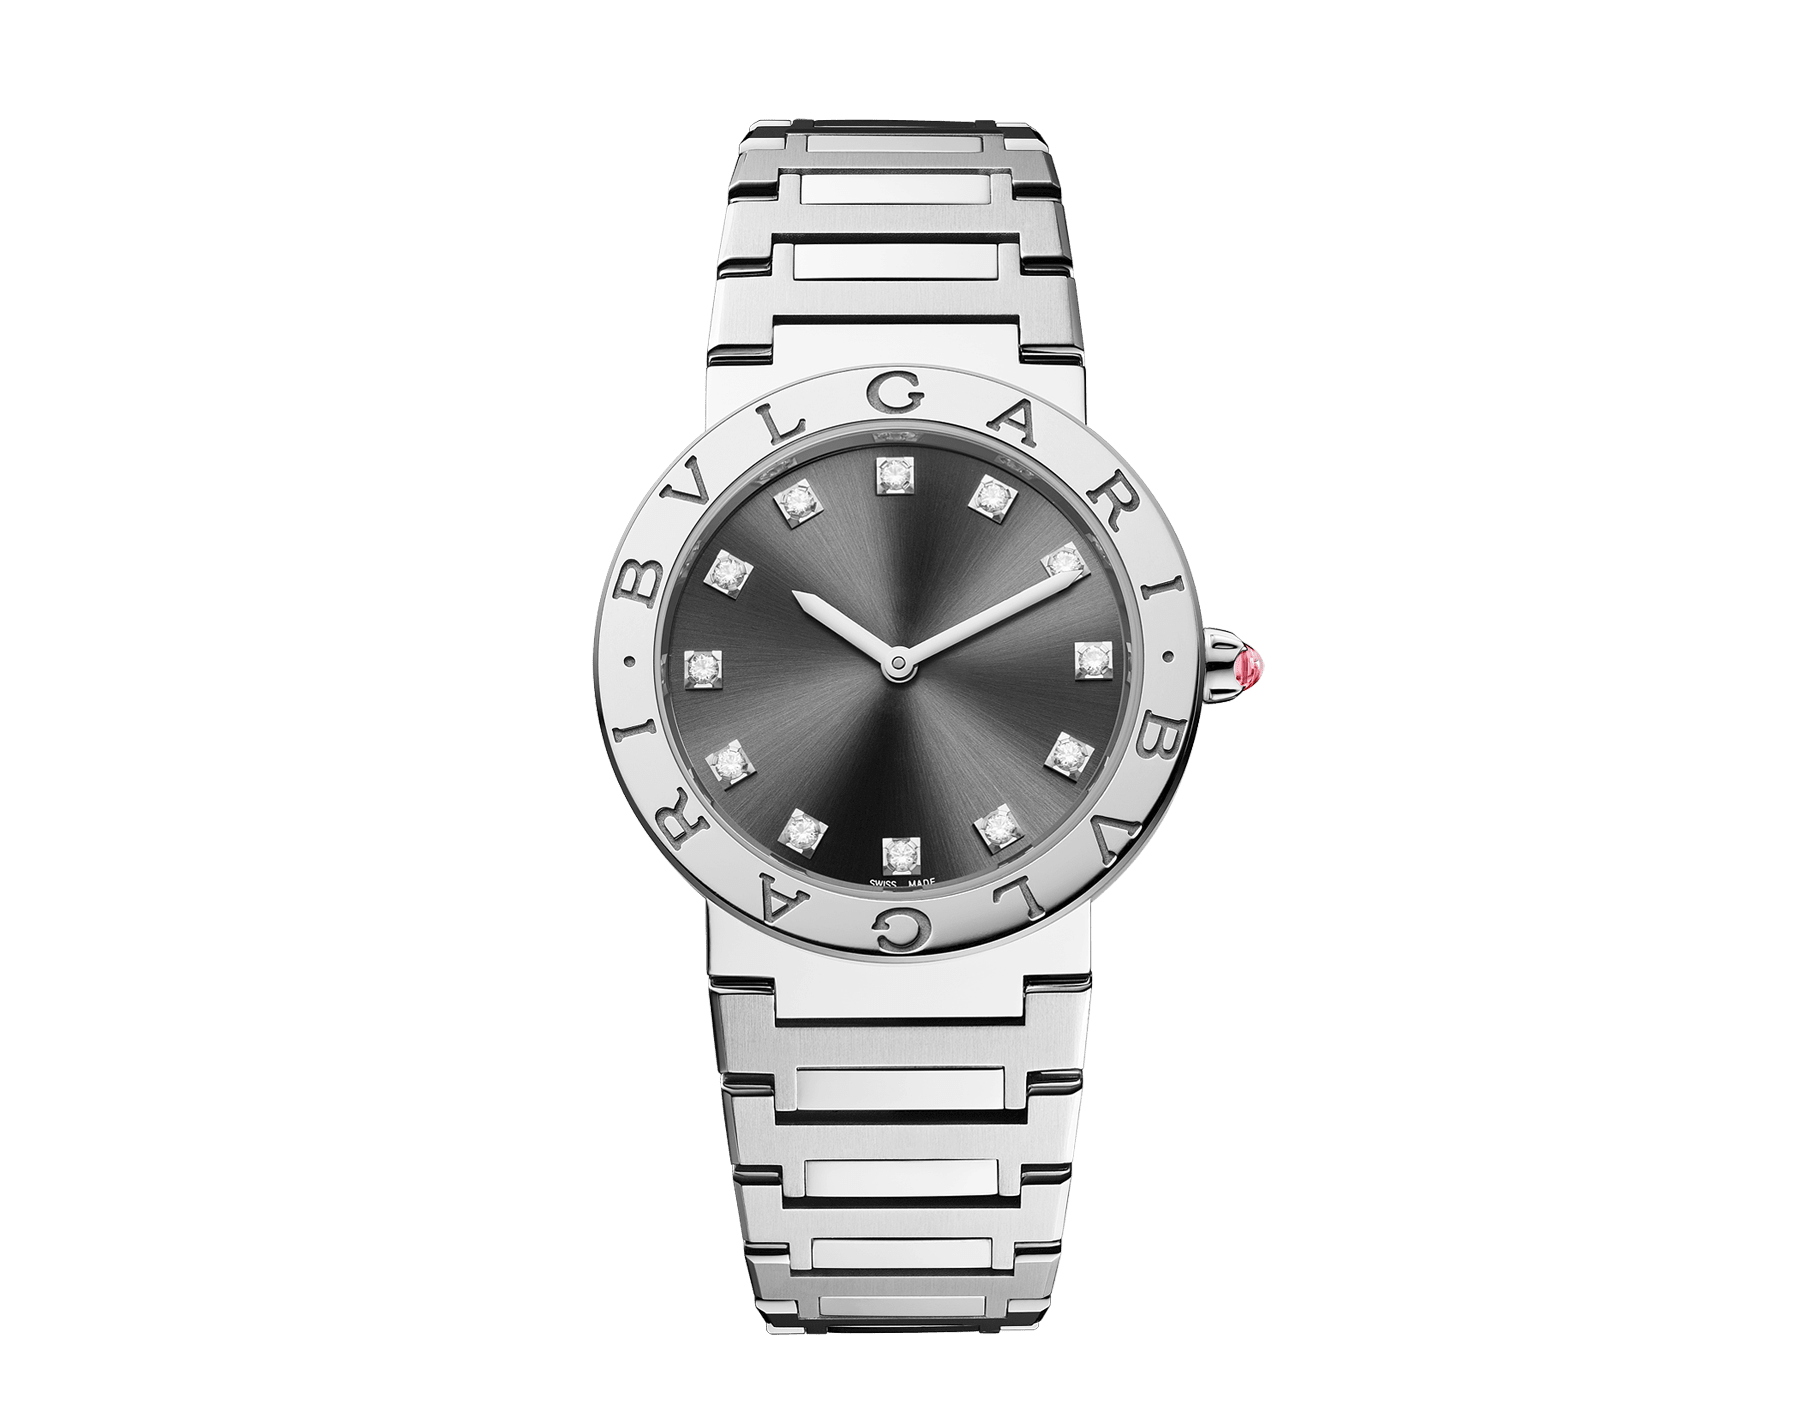 BVLGARI BVLGARI LADY watch in stainless steel case and bracelet, stainless steel bezel engraved with double logo, anthracite satiné soleil lacquered dial and diamond indexes 103689 image 1